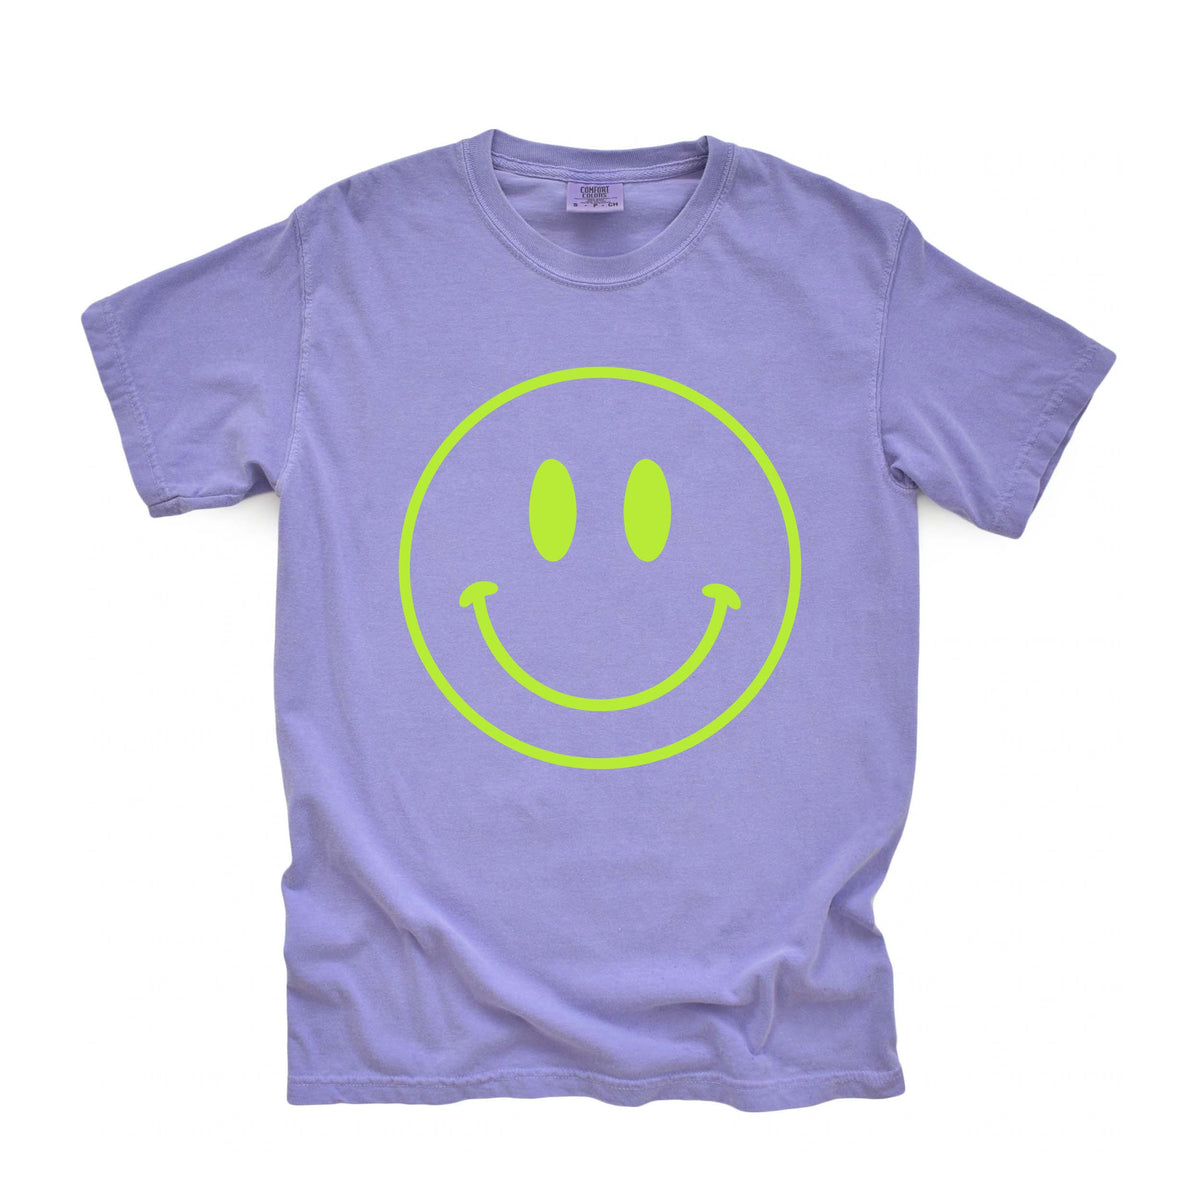 The Smile Tee